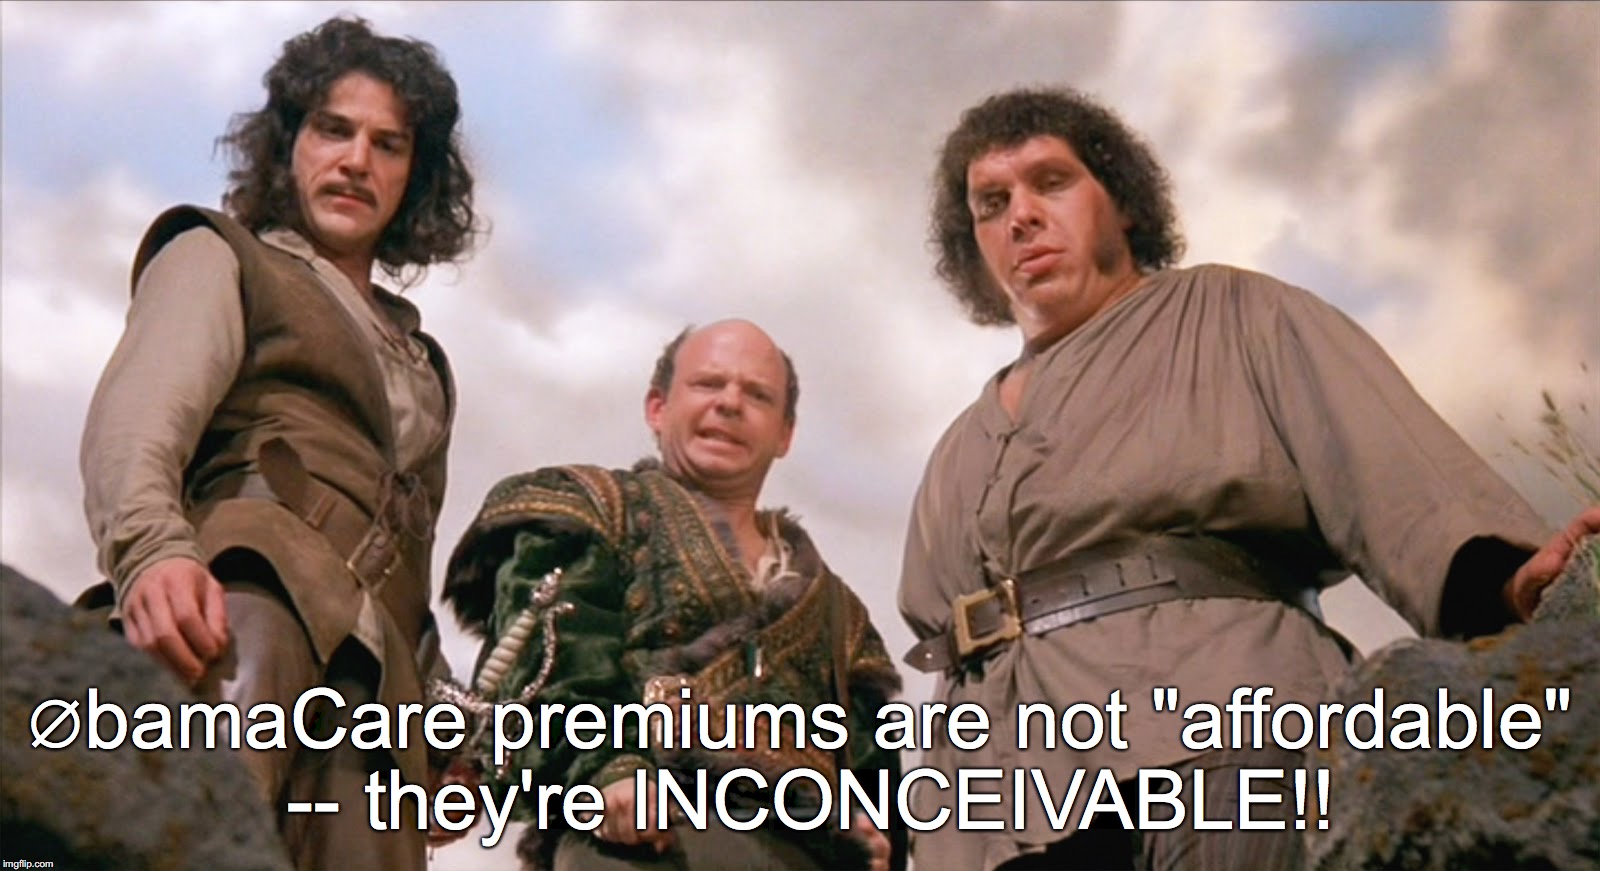 Vizzini | ∅bamaCare premiums are not "affordable" -- they're INCONCEIVABLE!! | image tagged in vizzini | made w/ Imgflip meme maker